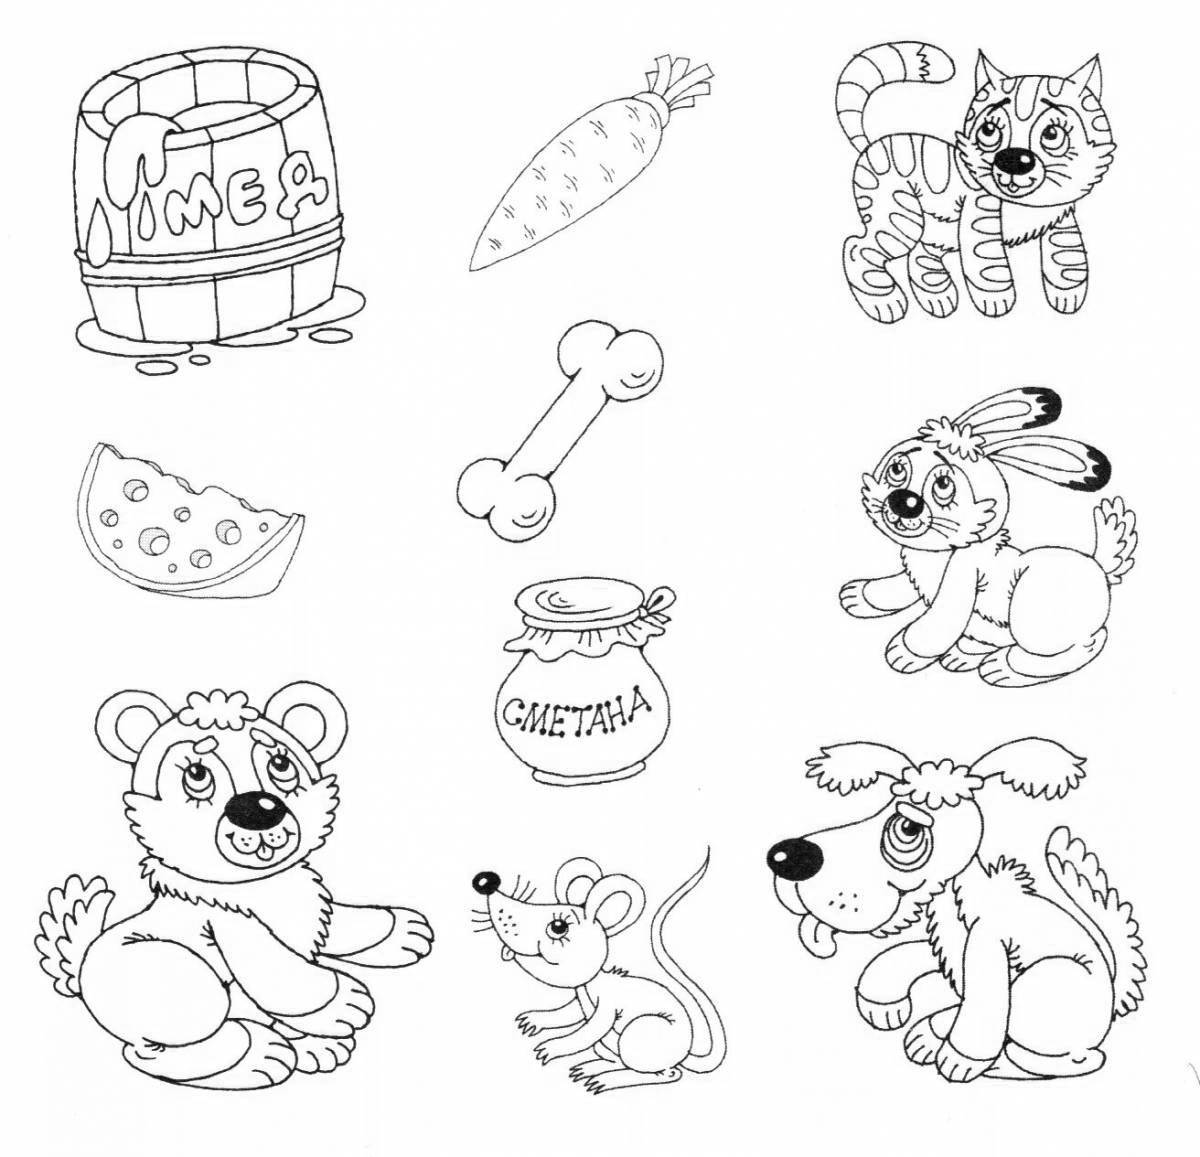 Fun coloring activities for 3-4 year olds